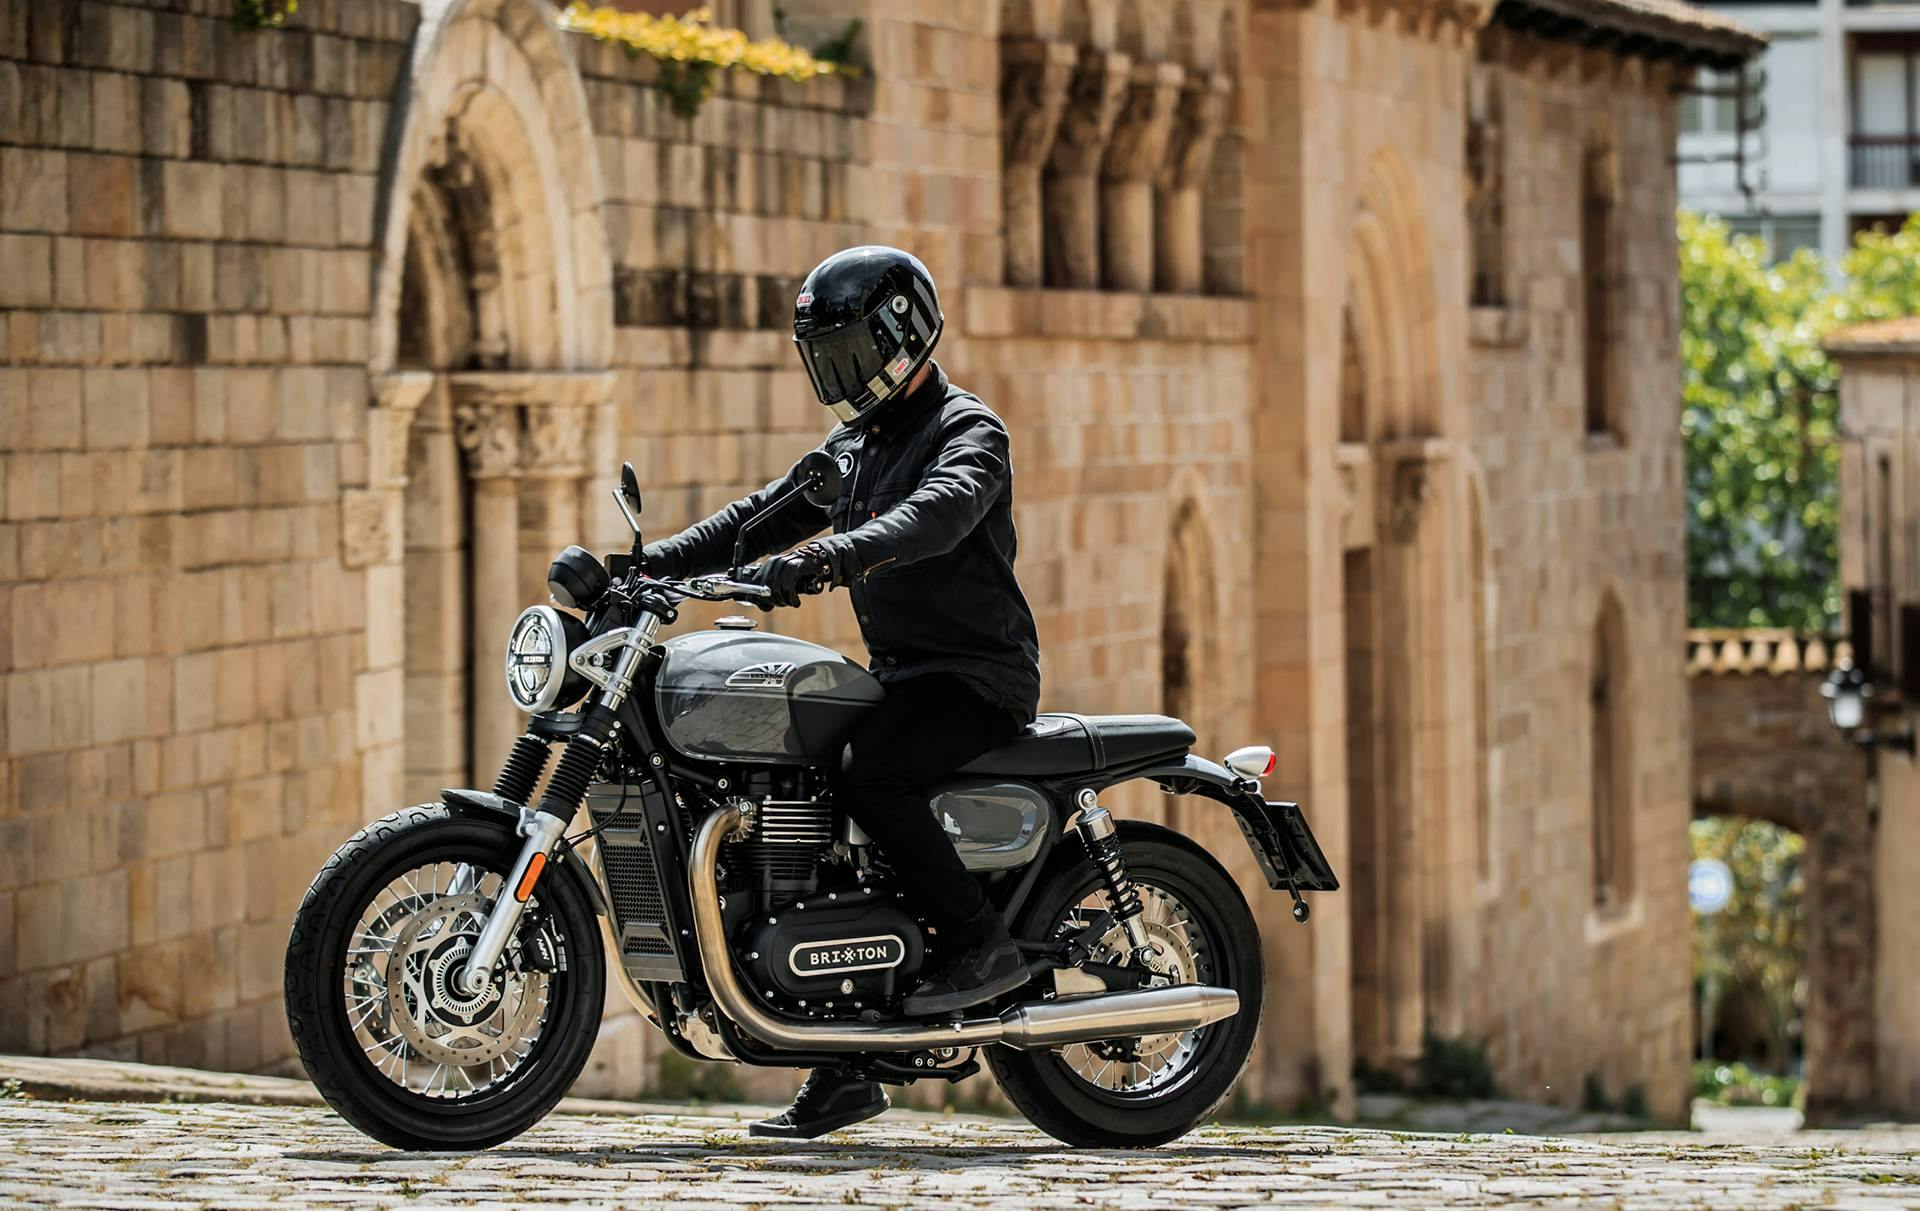 A motorcycle rider dressed in all black sitting on a Brixton Cromwell 1200 in Timberwolf Grey in front of an old building in Barcelona, Spain